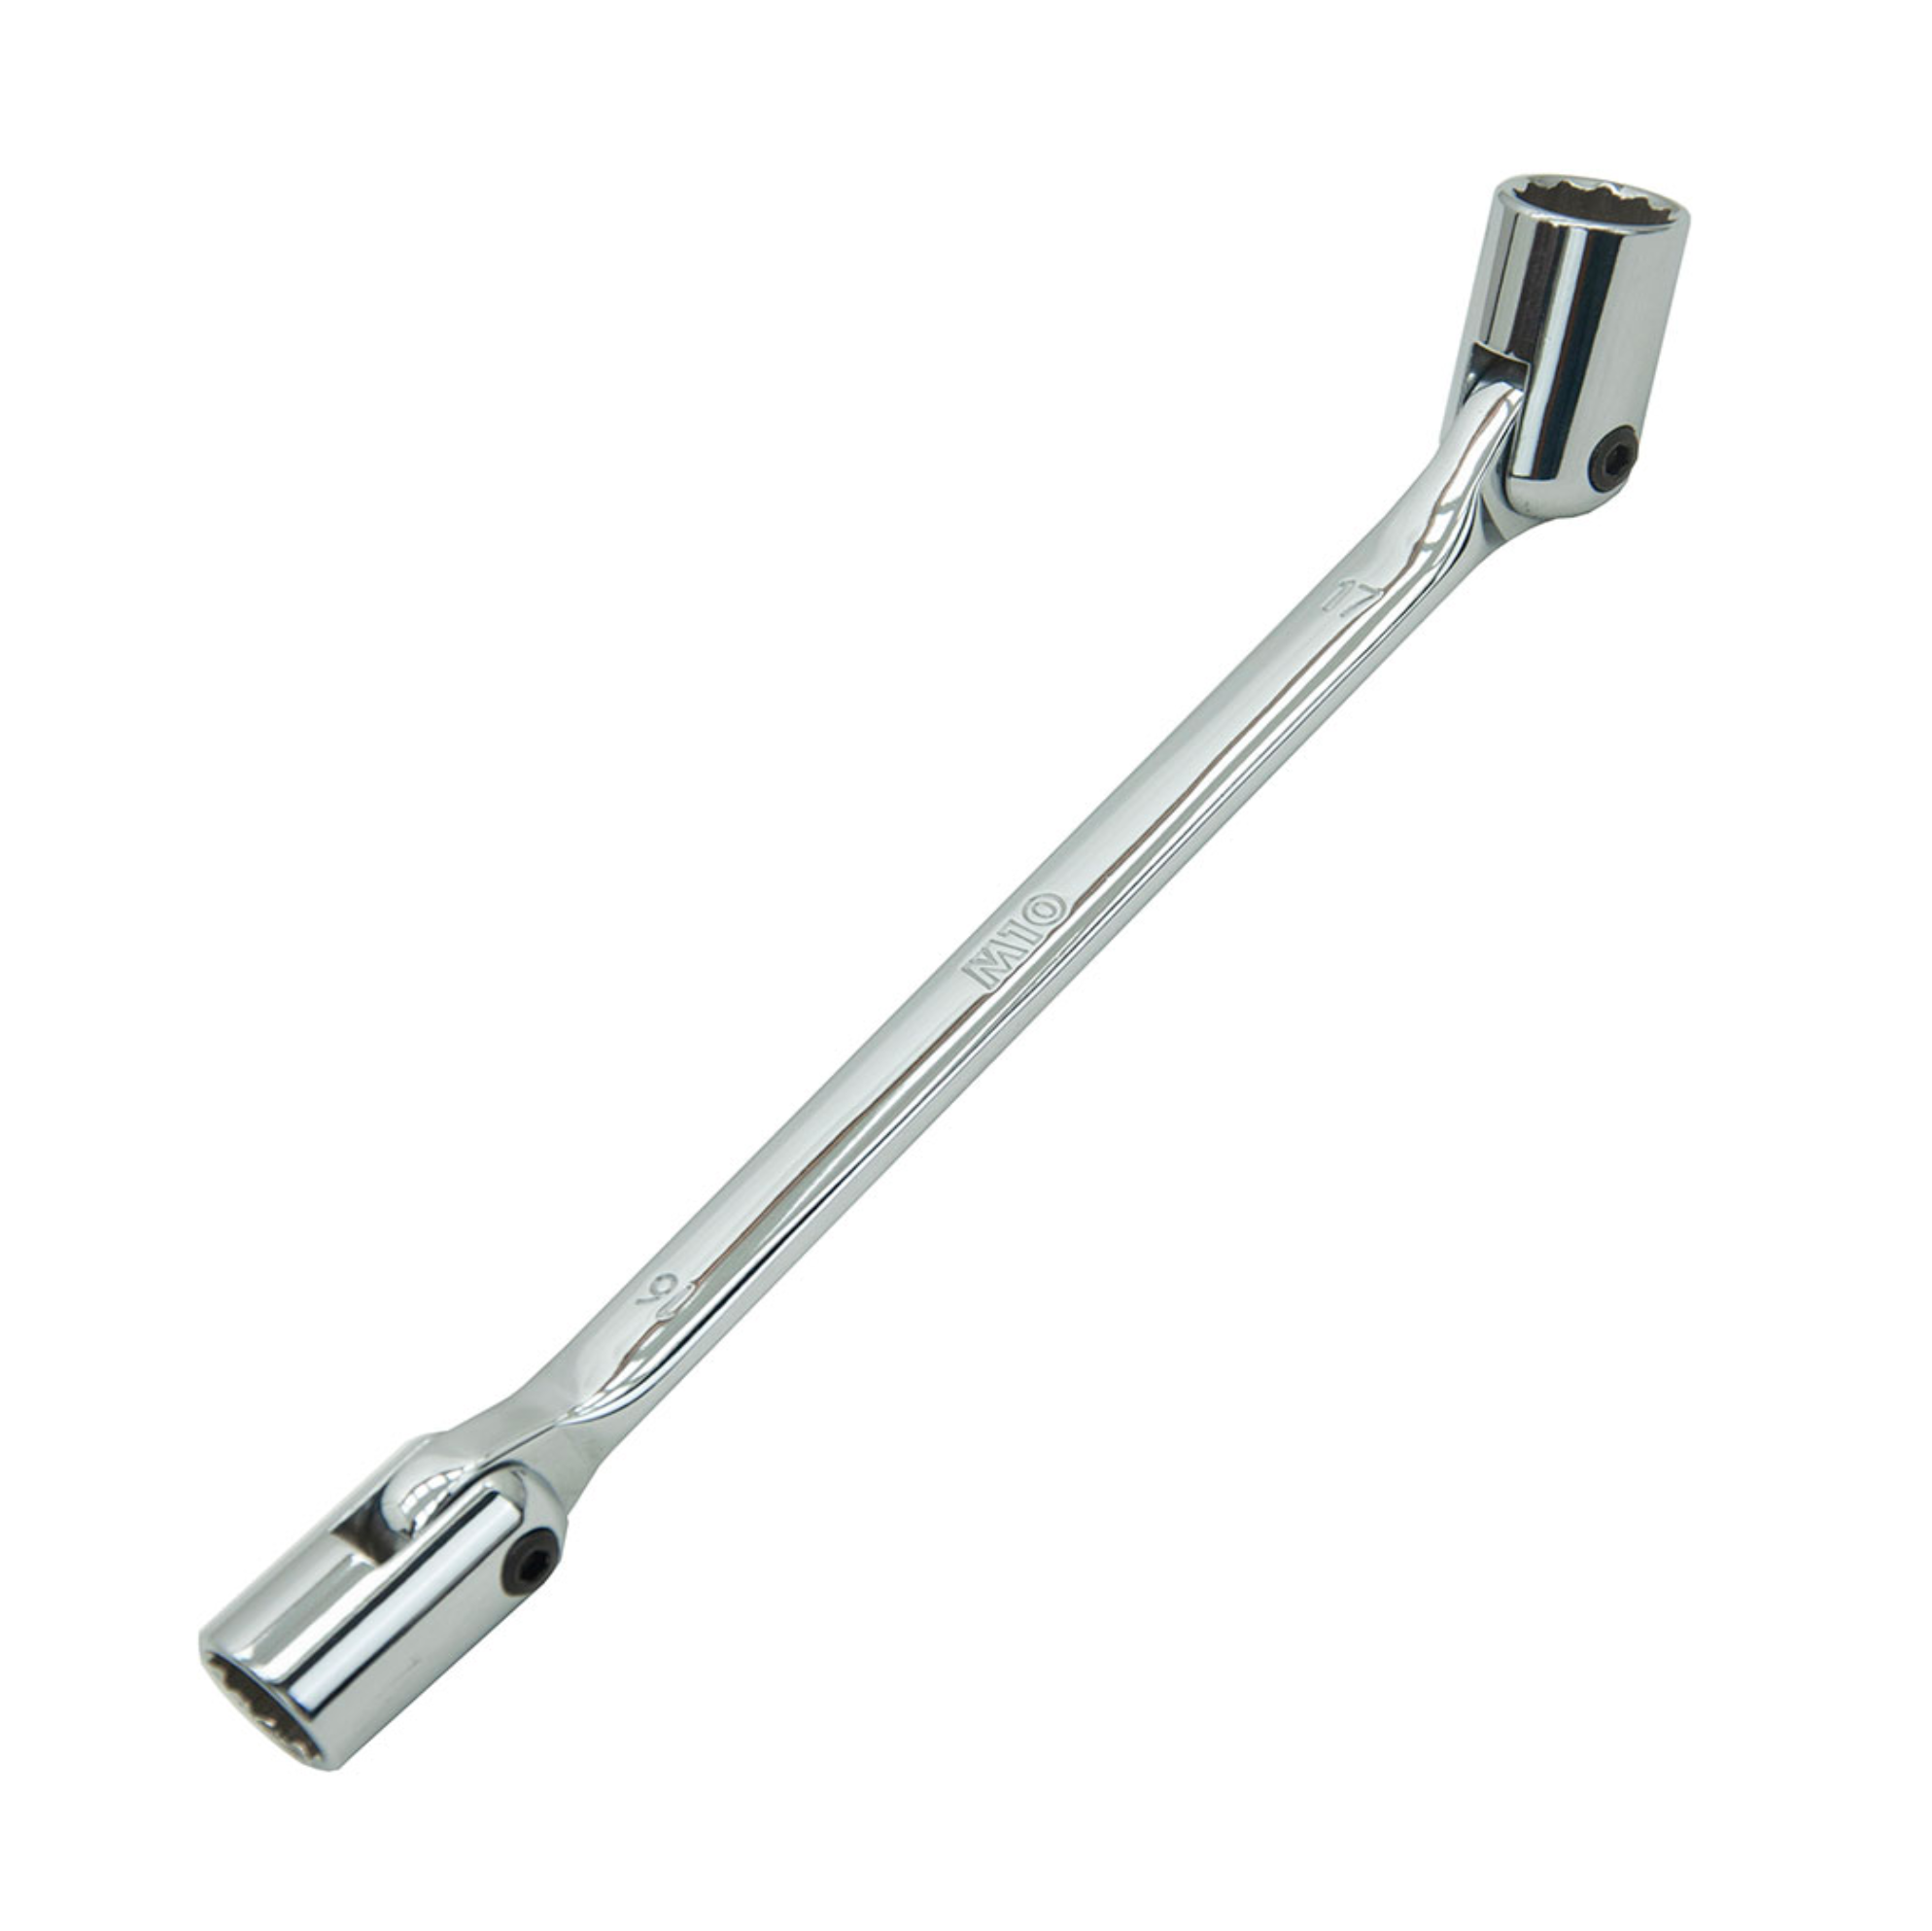 M10 Double-End Swivel Socket Wrench (INCHES)